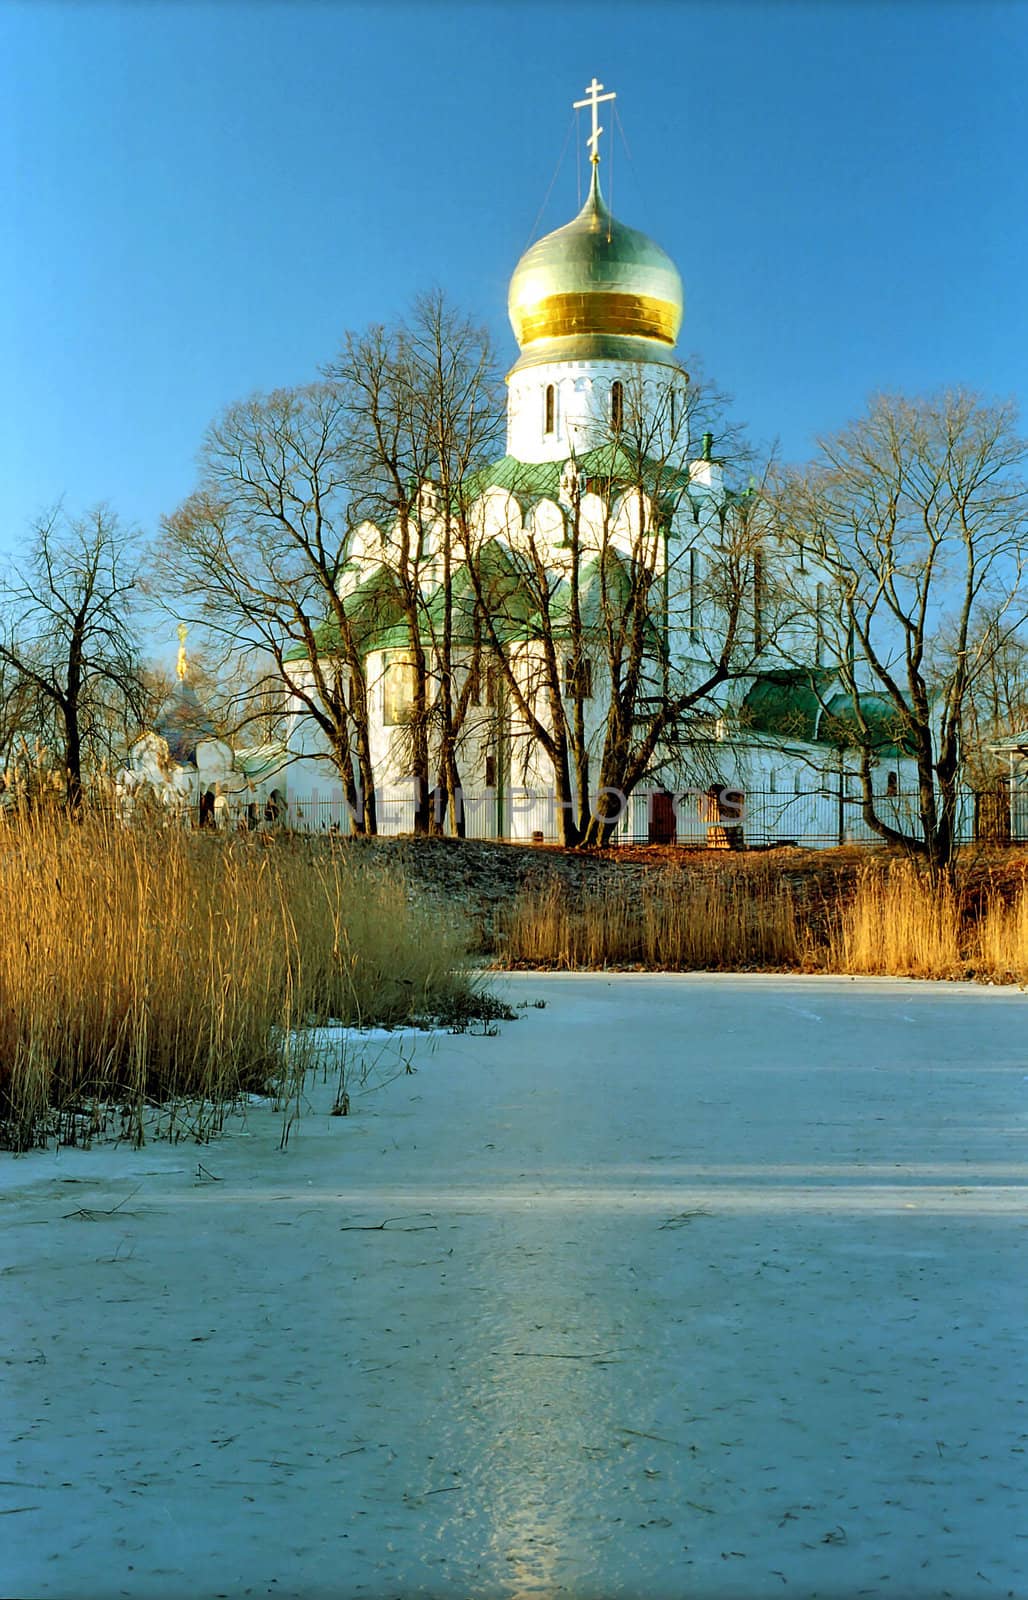 Russian church near iced pond with reflection of golden cupola